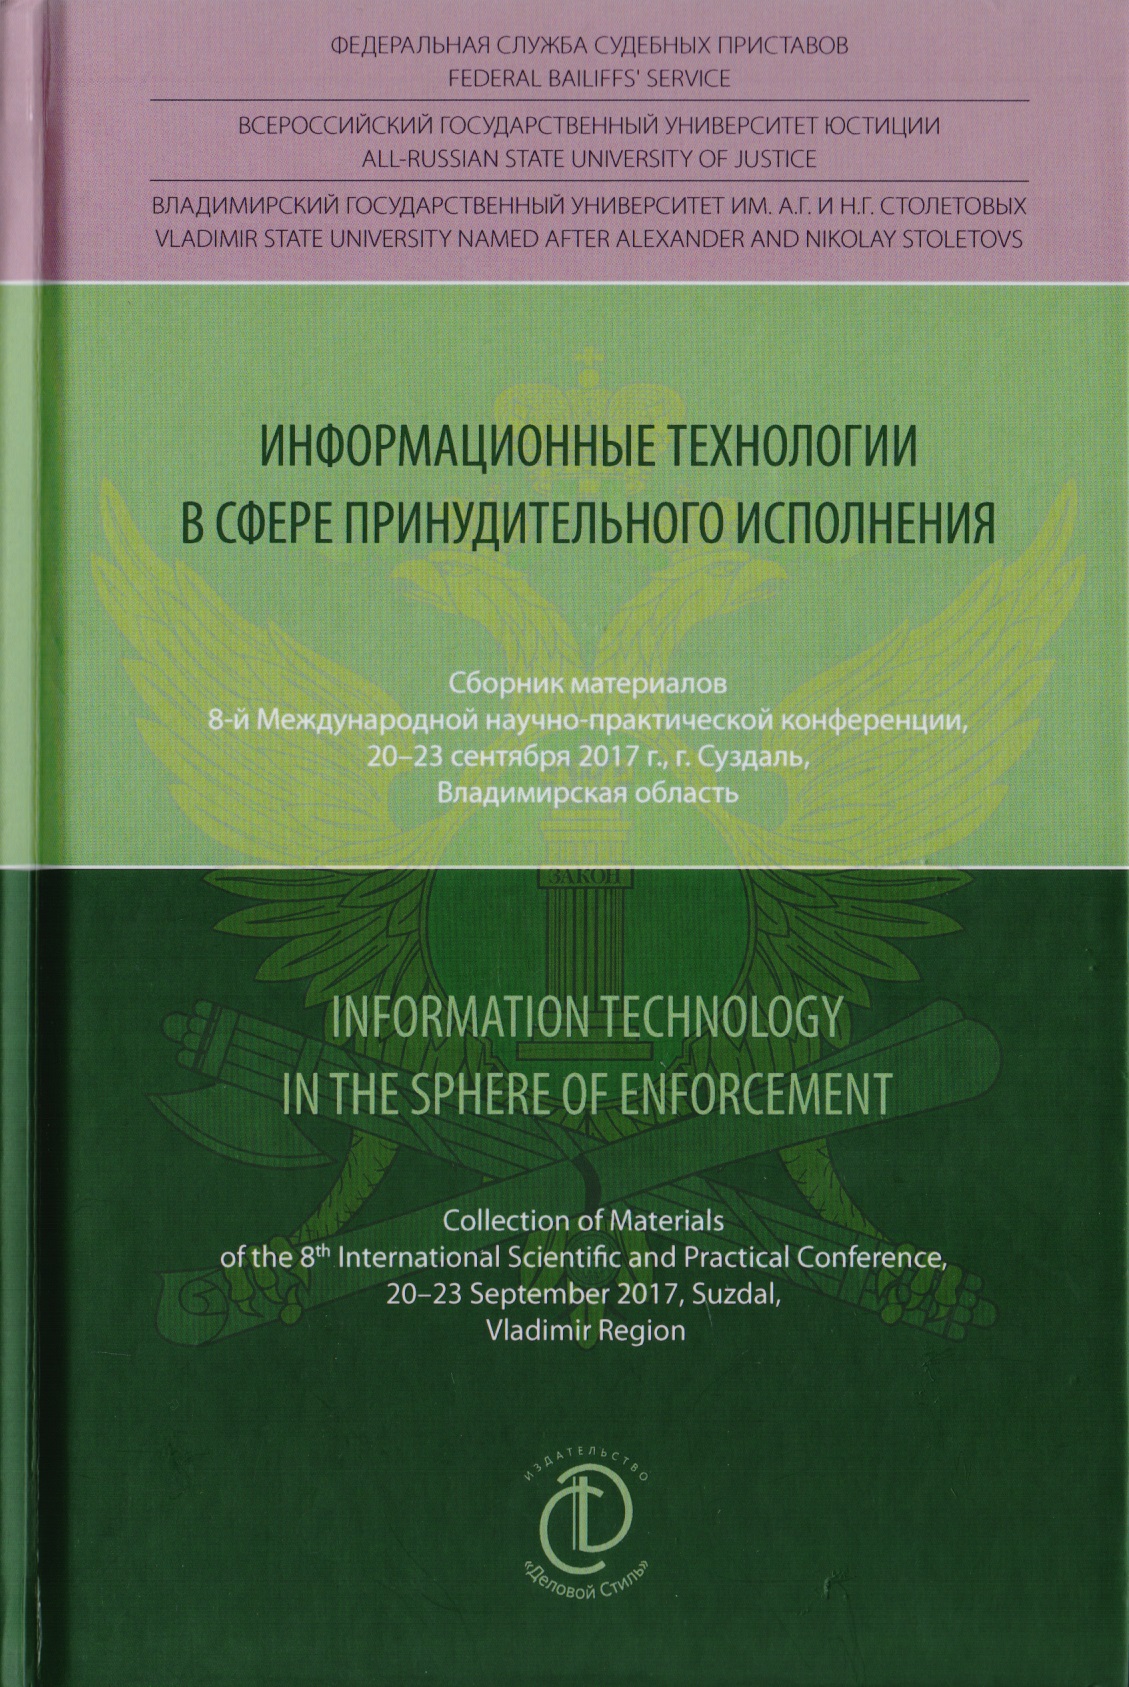      . Information Technology in the Sphere of Enforcement.   8-  - , 20-23  2017 ., . ,  